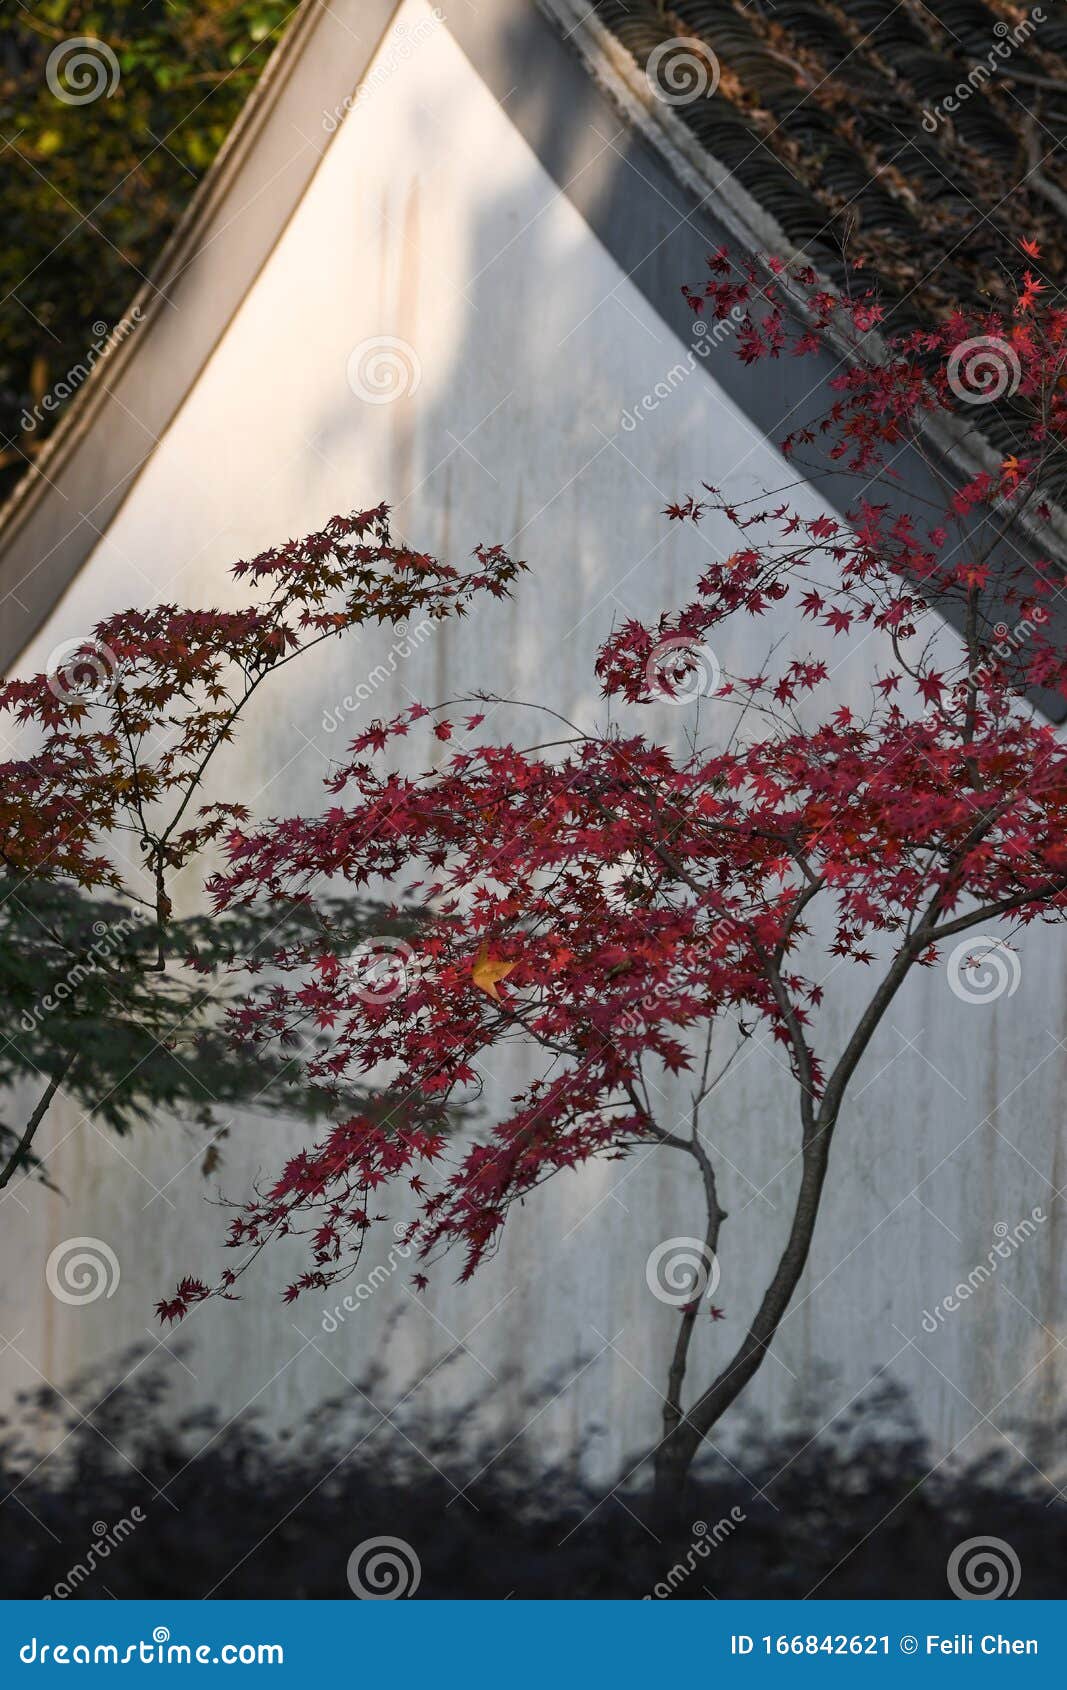 maple leaves and chinese ancient architectural